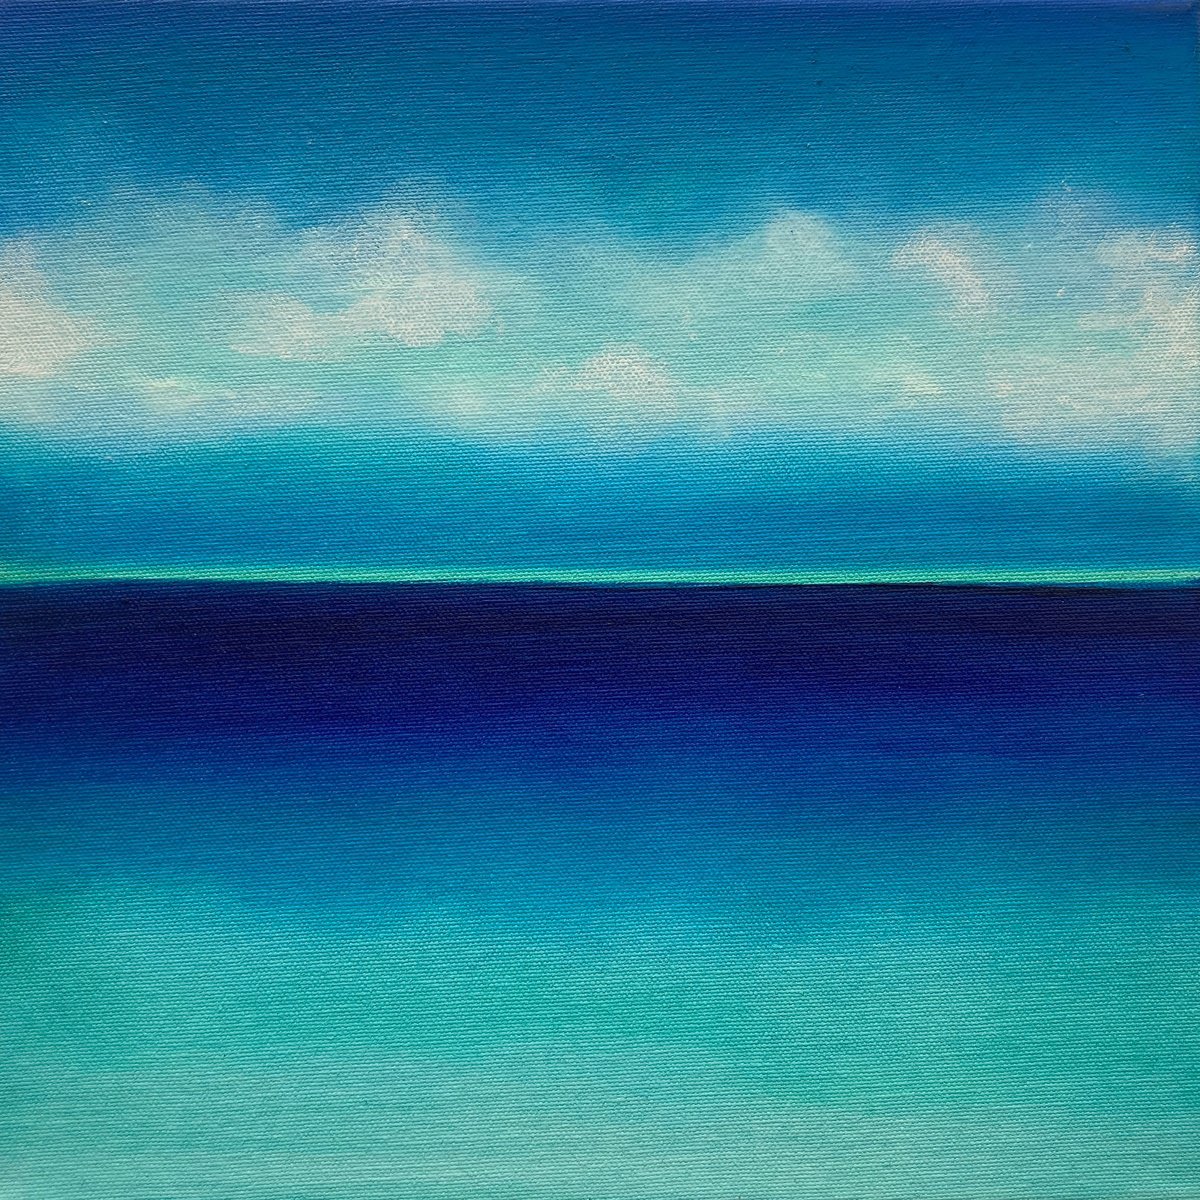 Floats With Passing Clouds by Julia Everett